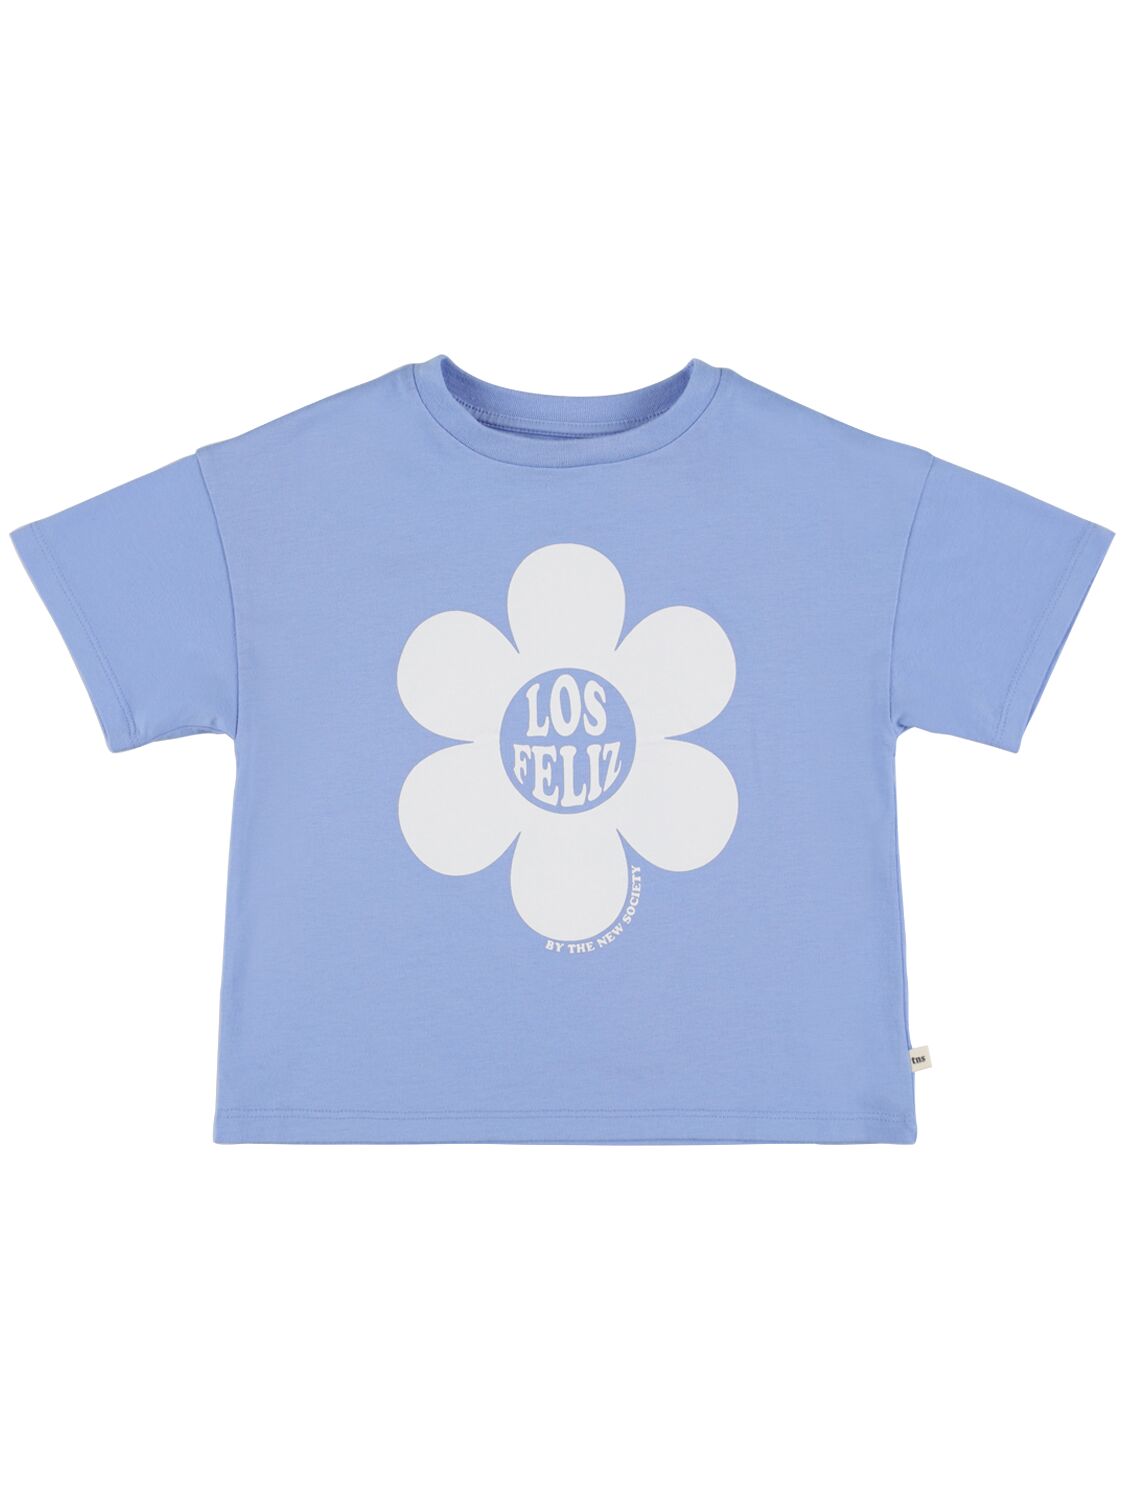 The New Society Kids' Printed Cotton Jersey T-shirt In Light Blue